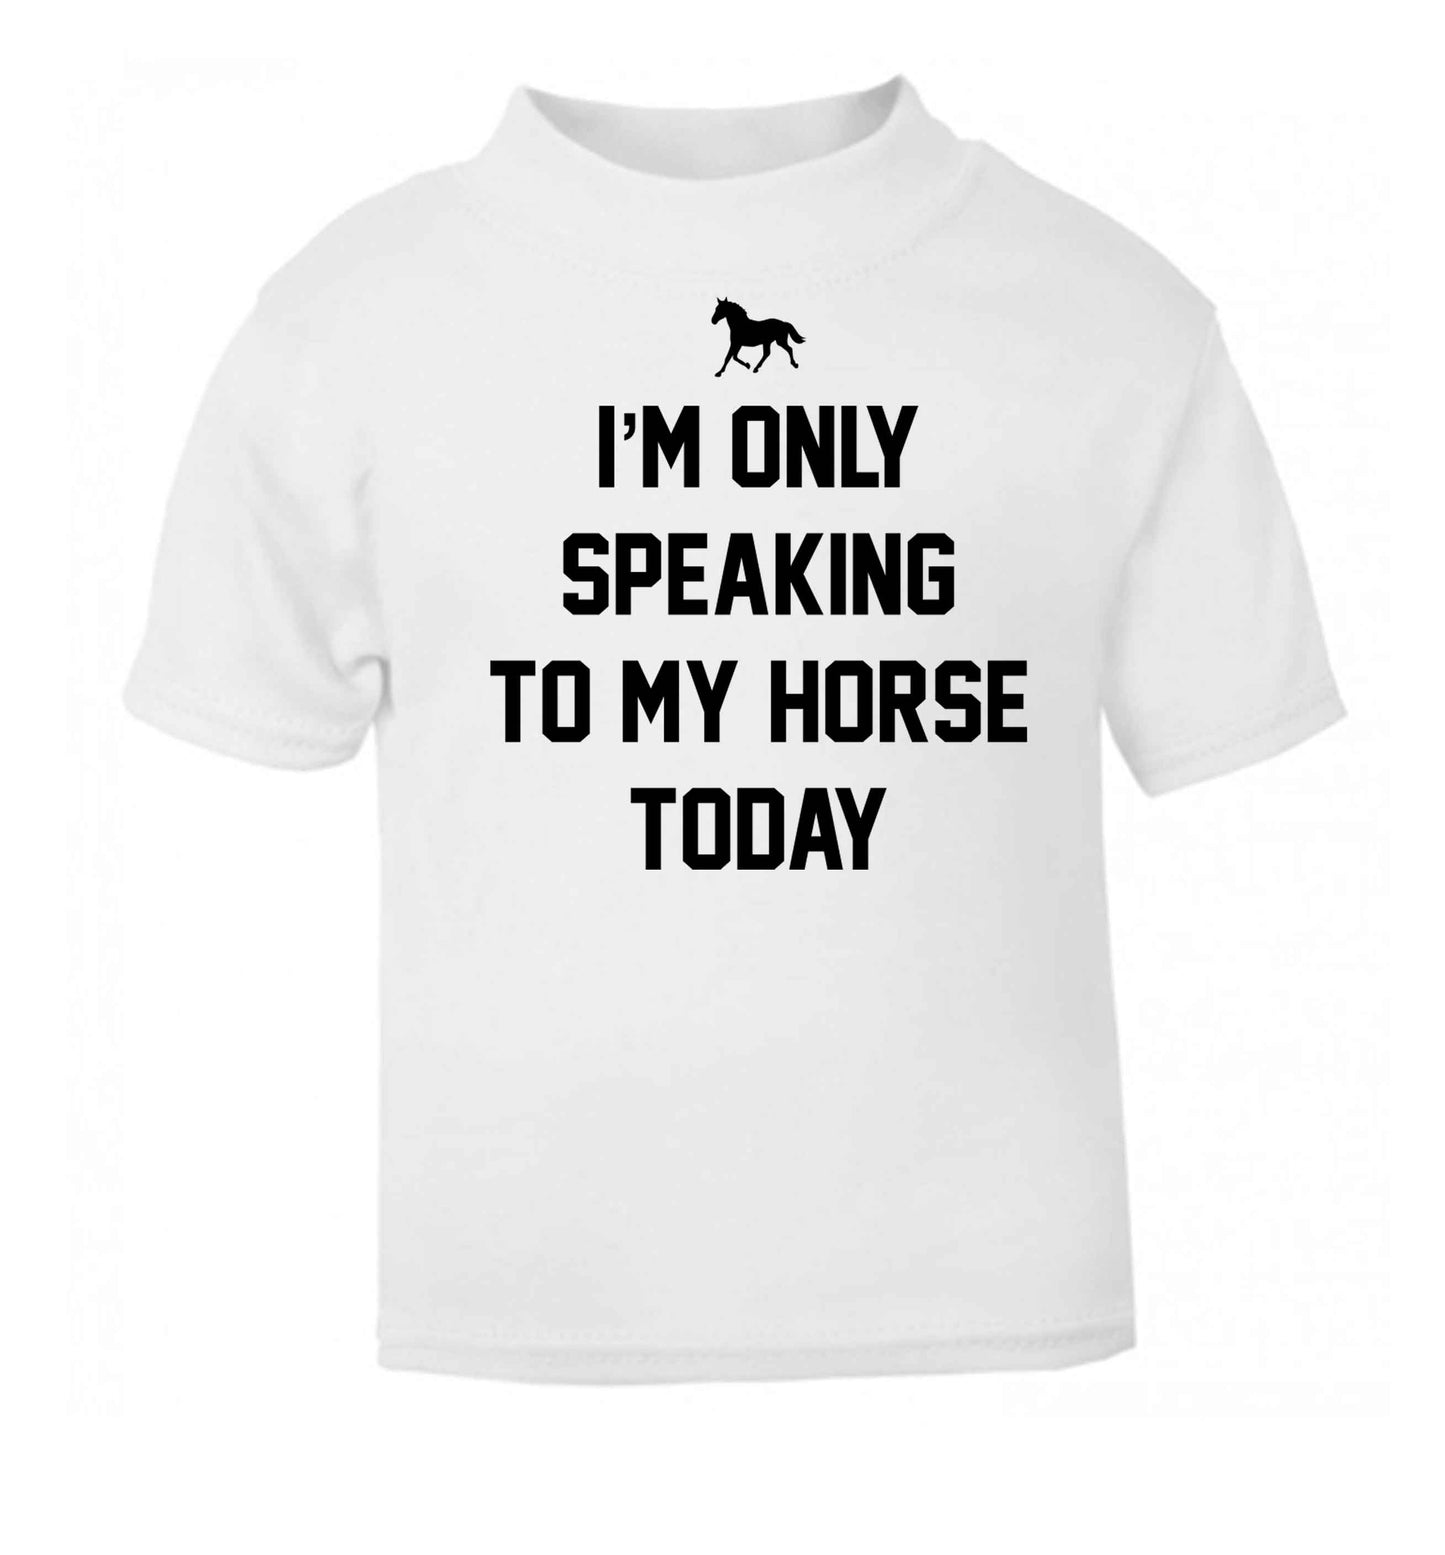 I'm only speaking to my horse today white baby toddler Tshirt 2 Years